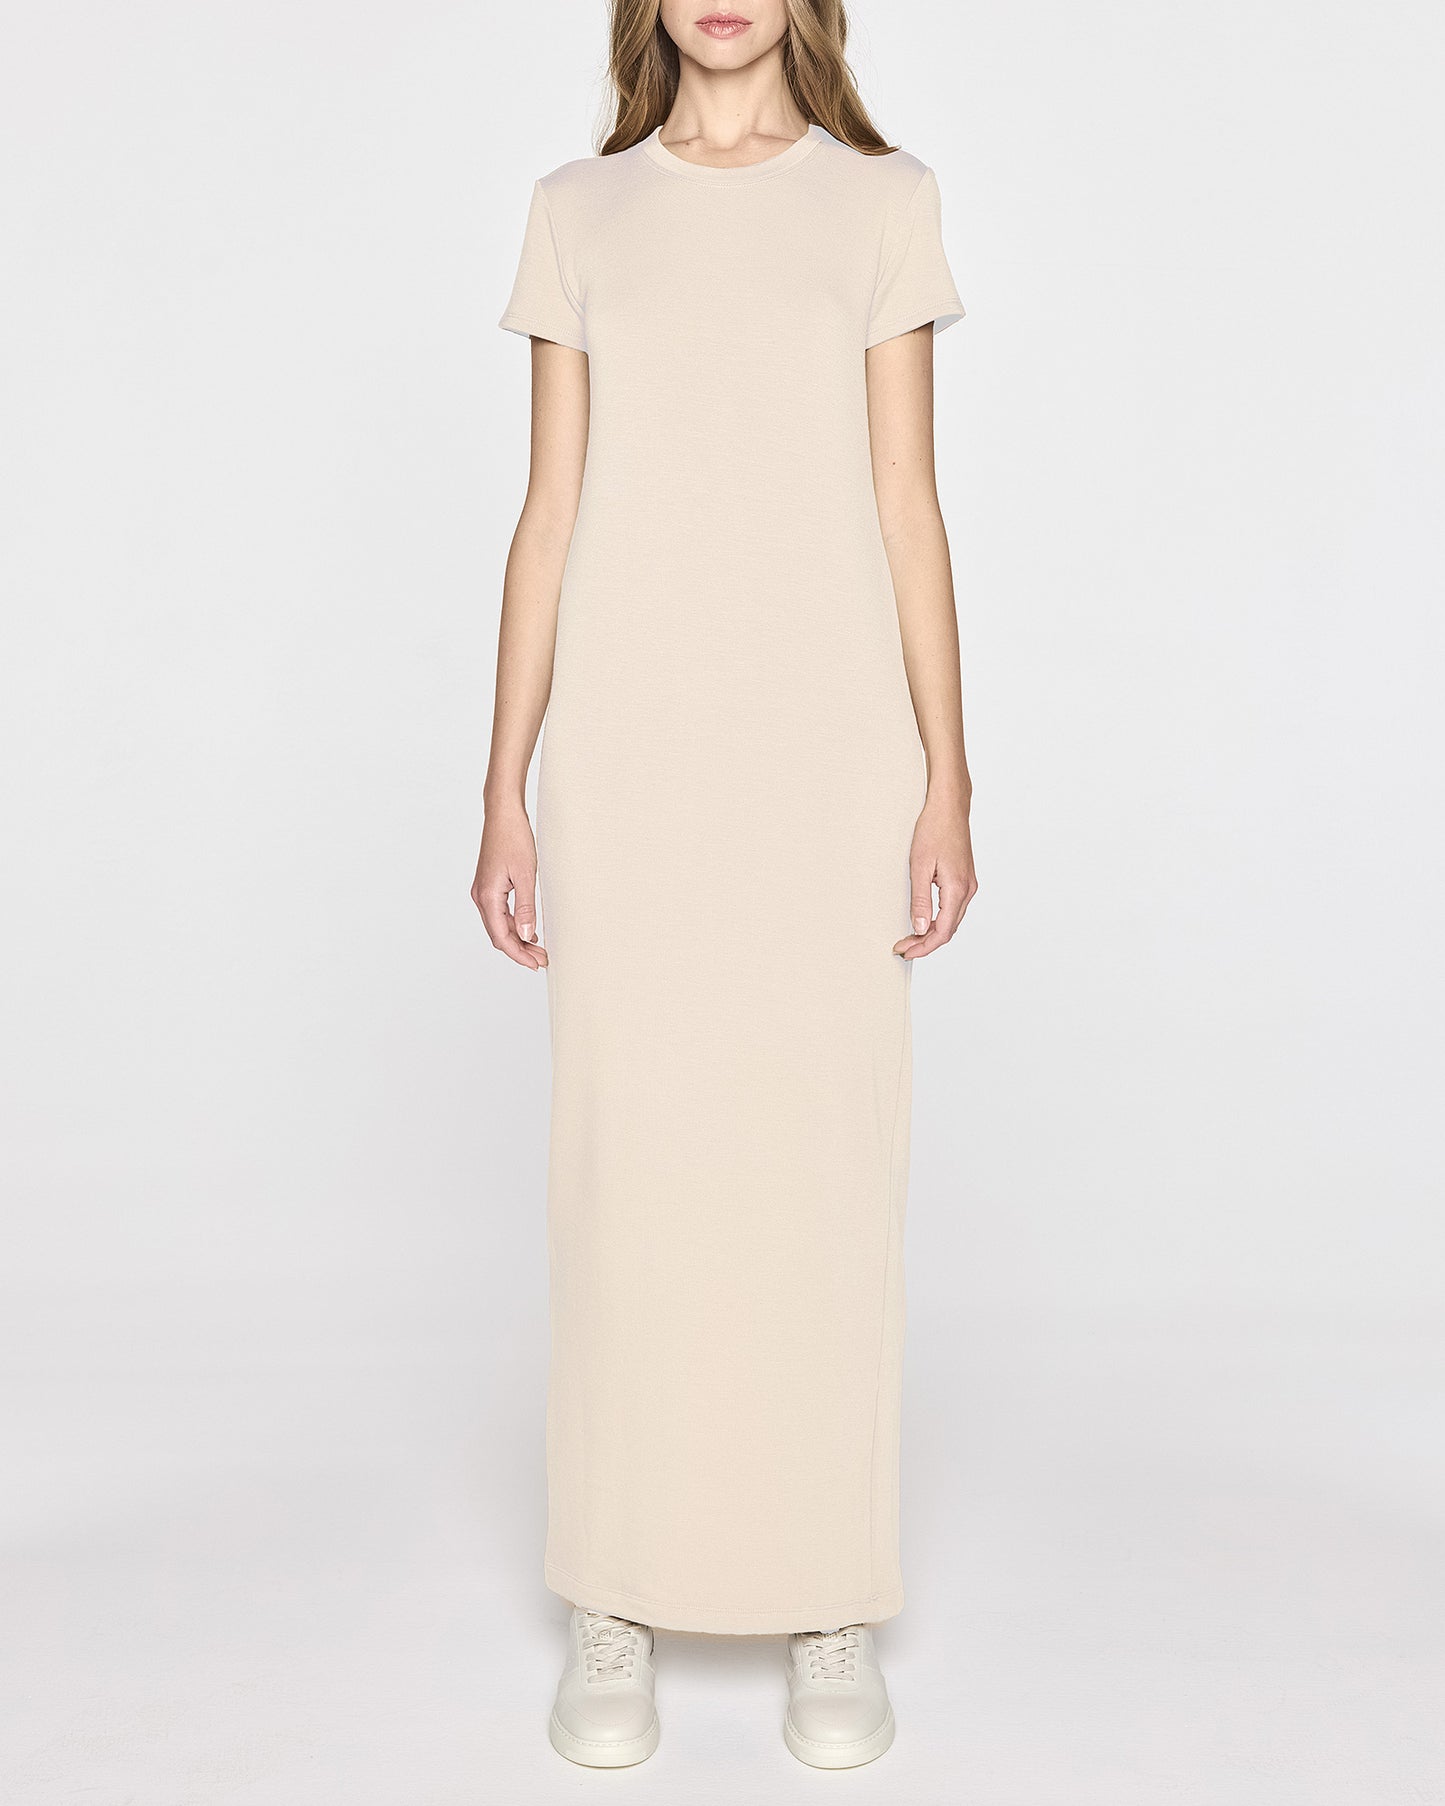 Stone | The Perfect T Dress Front